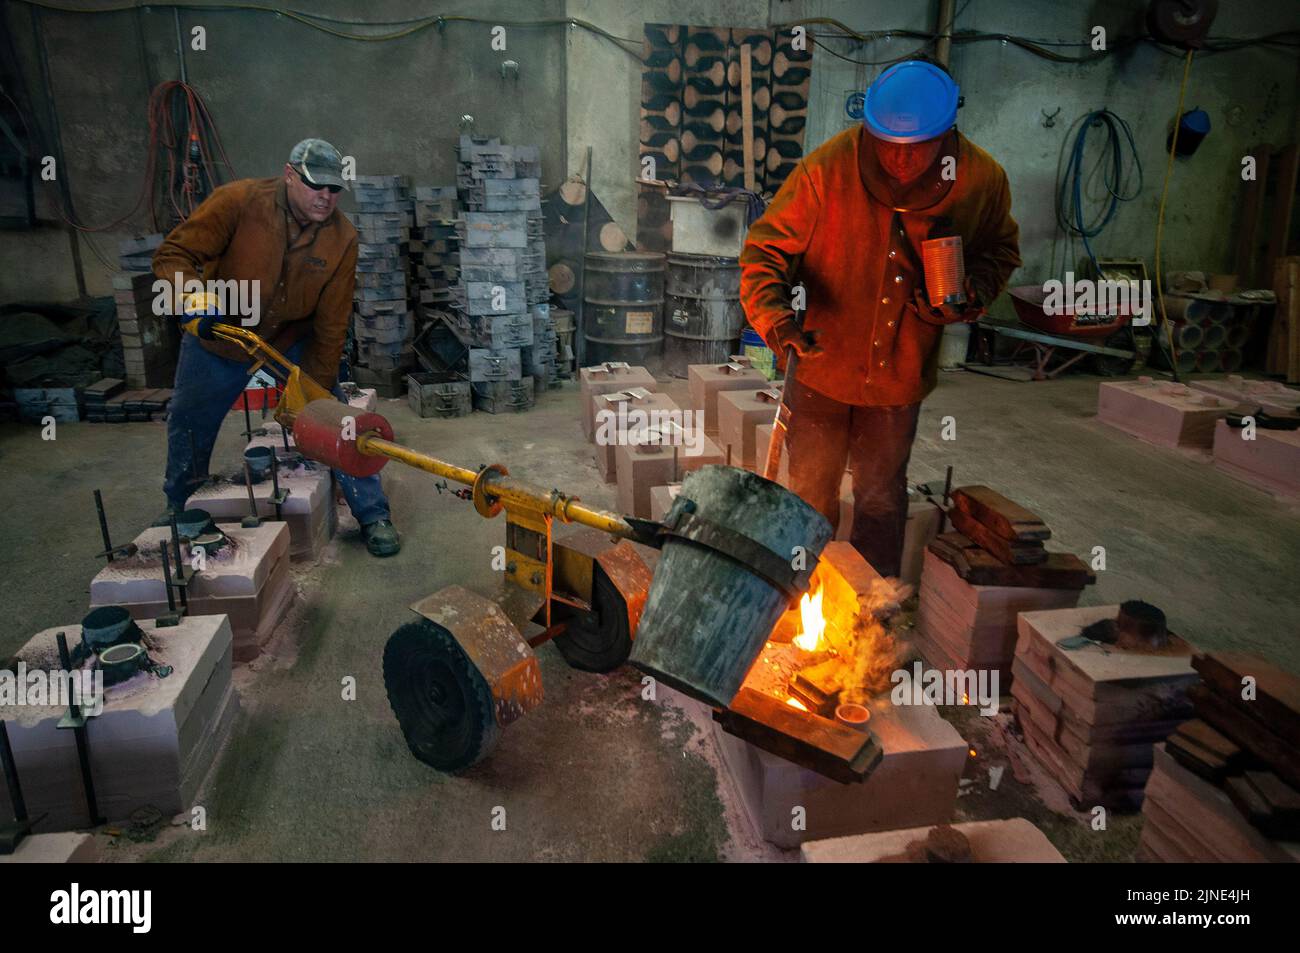 Foundry workers casting molten metal into moulds in a small family foundry in Perth, Western Australia Stock Photo